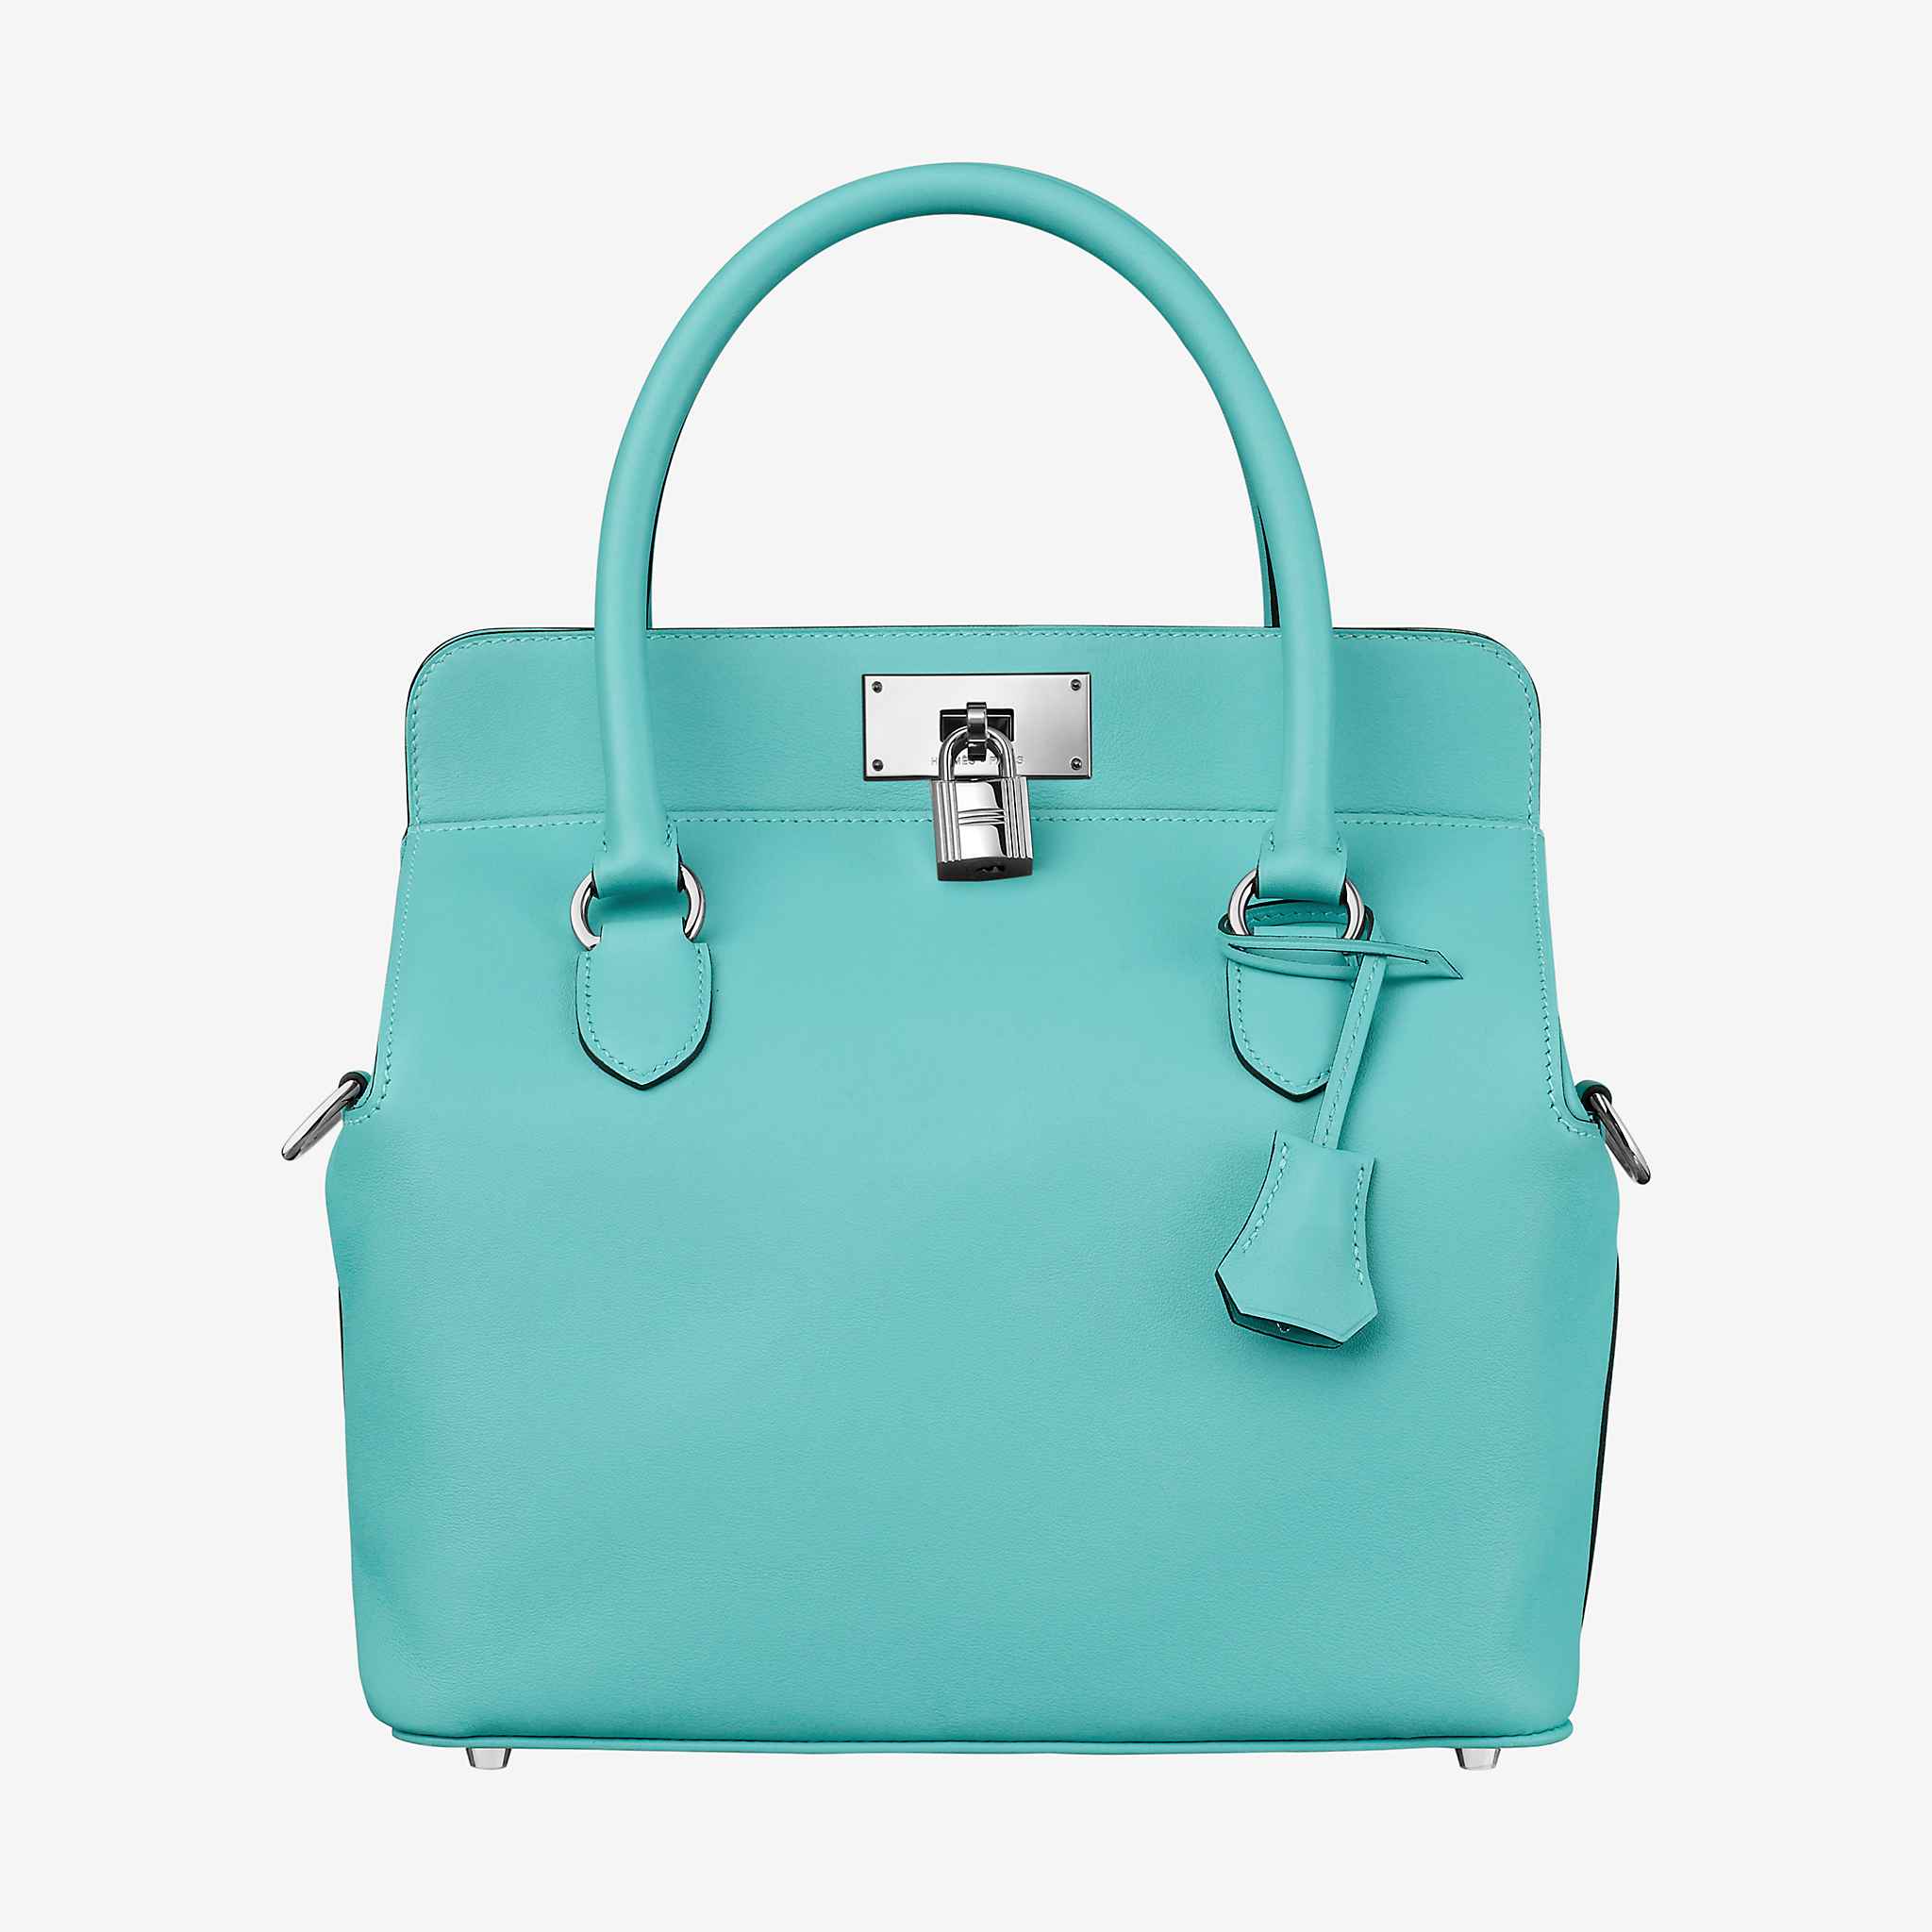 Reference guide to authentic Hermes Toolbox Bag 20 26 33 Sizes